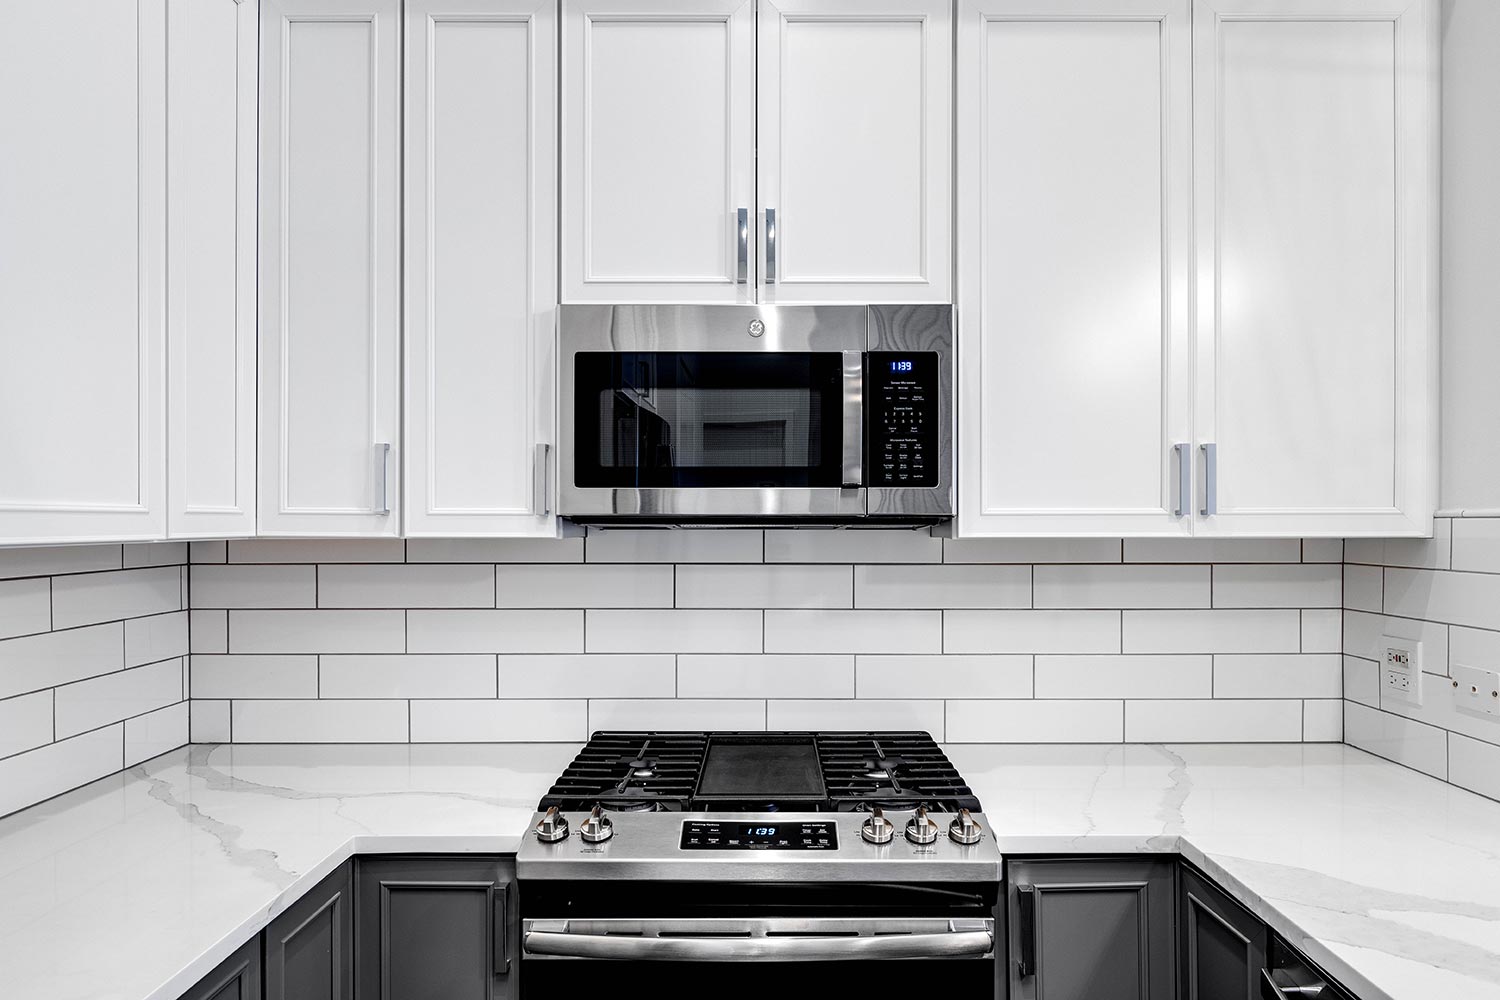 A detail shot of cabinets and stainless steel GE appliances in a small condo kitchen